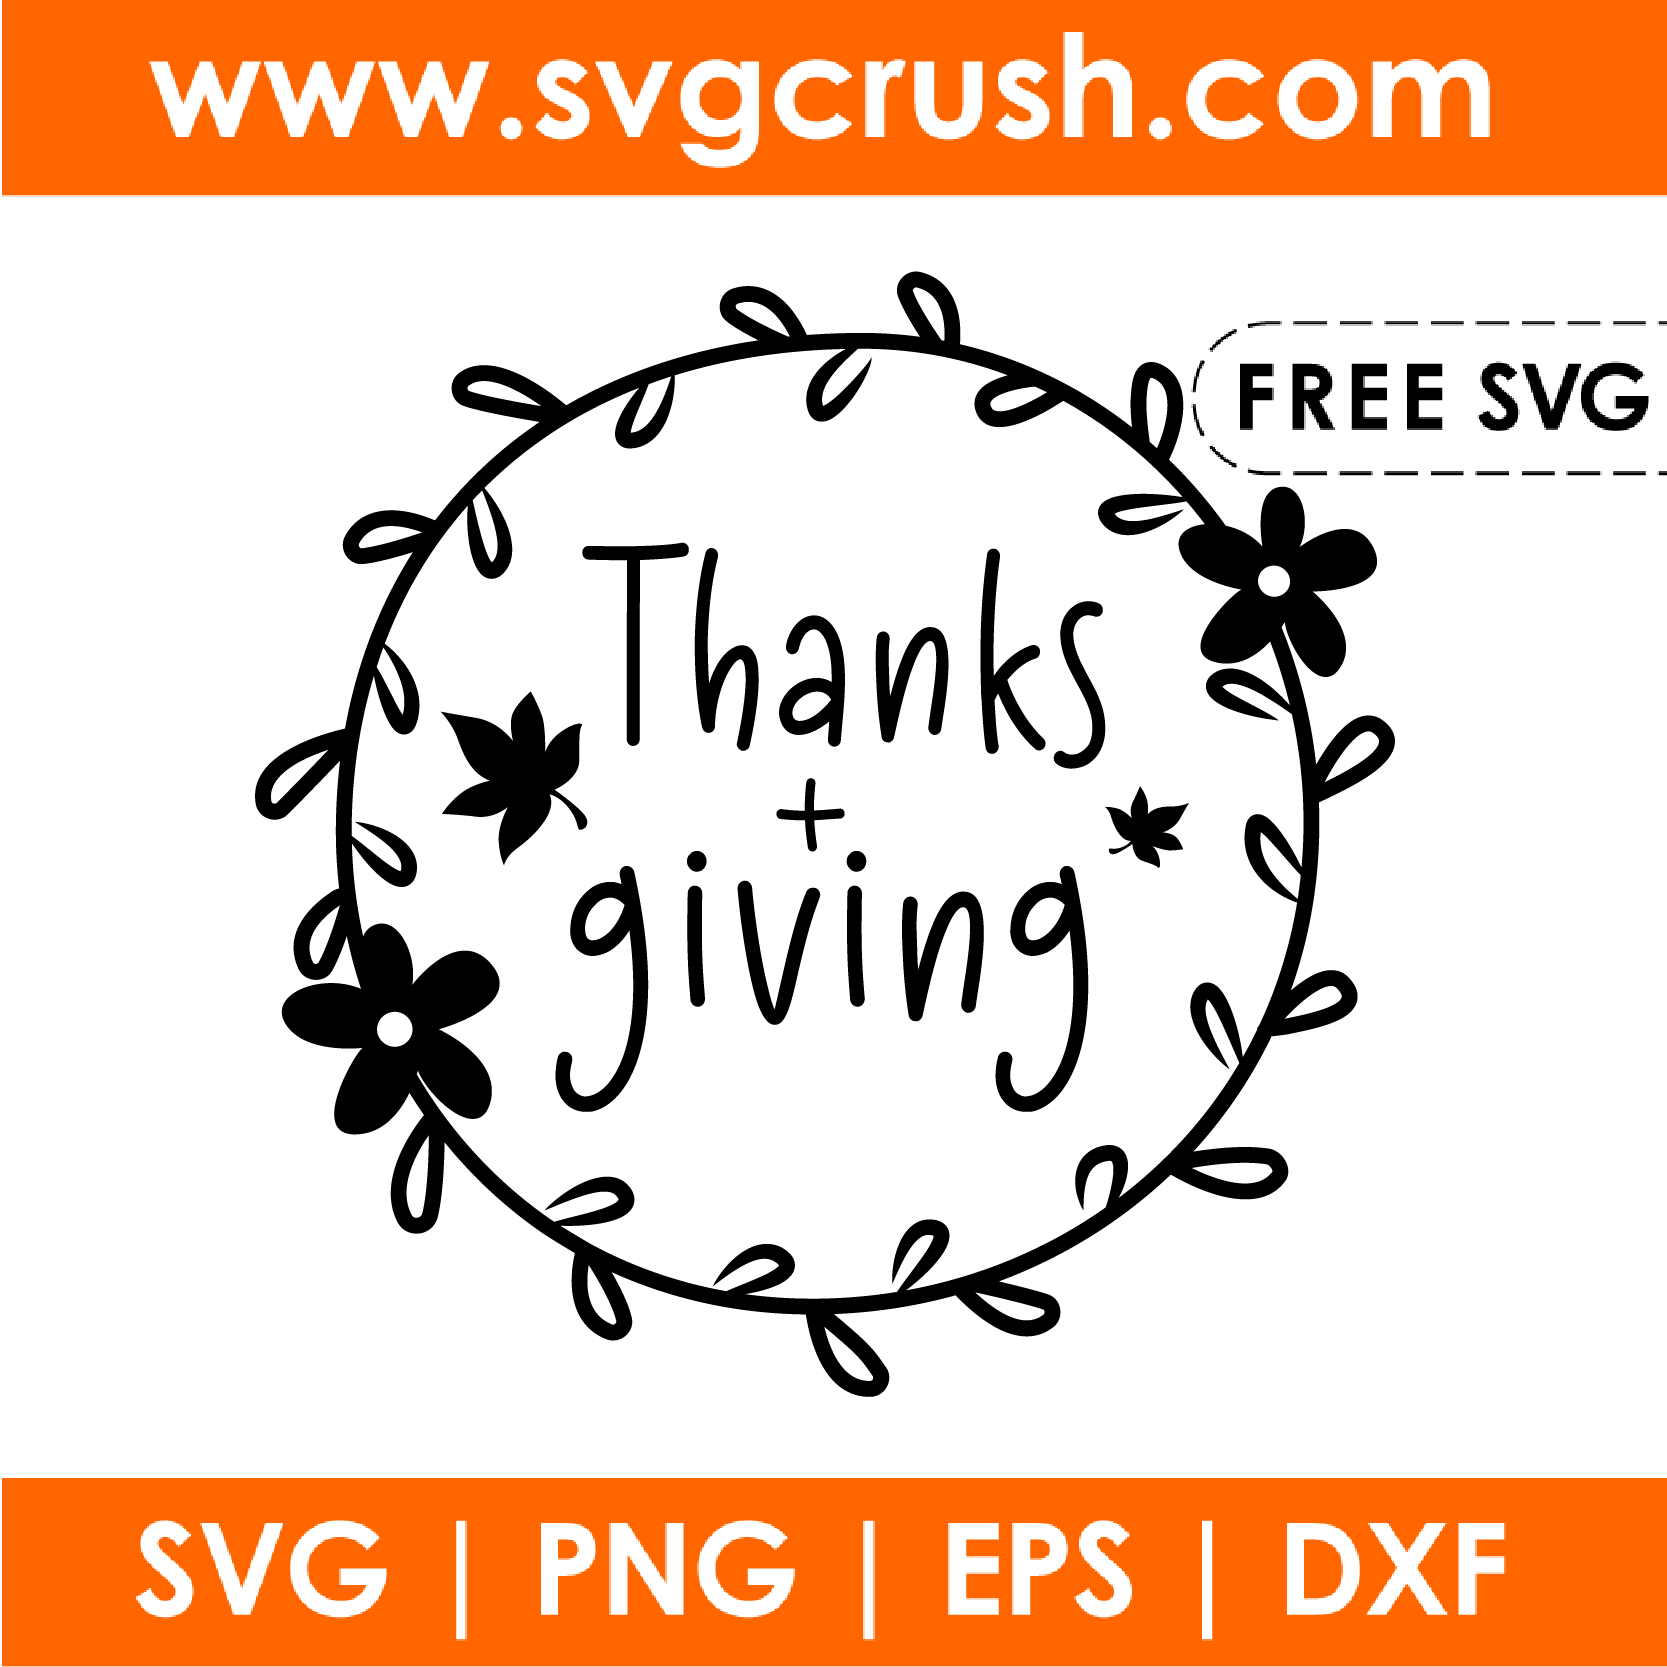 free thanks+giving-001 svg